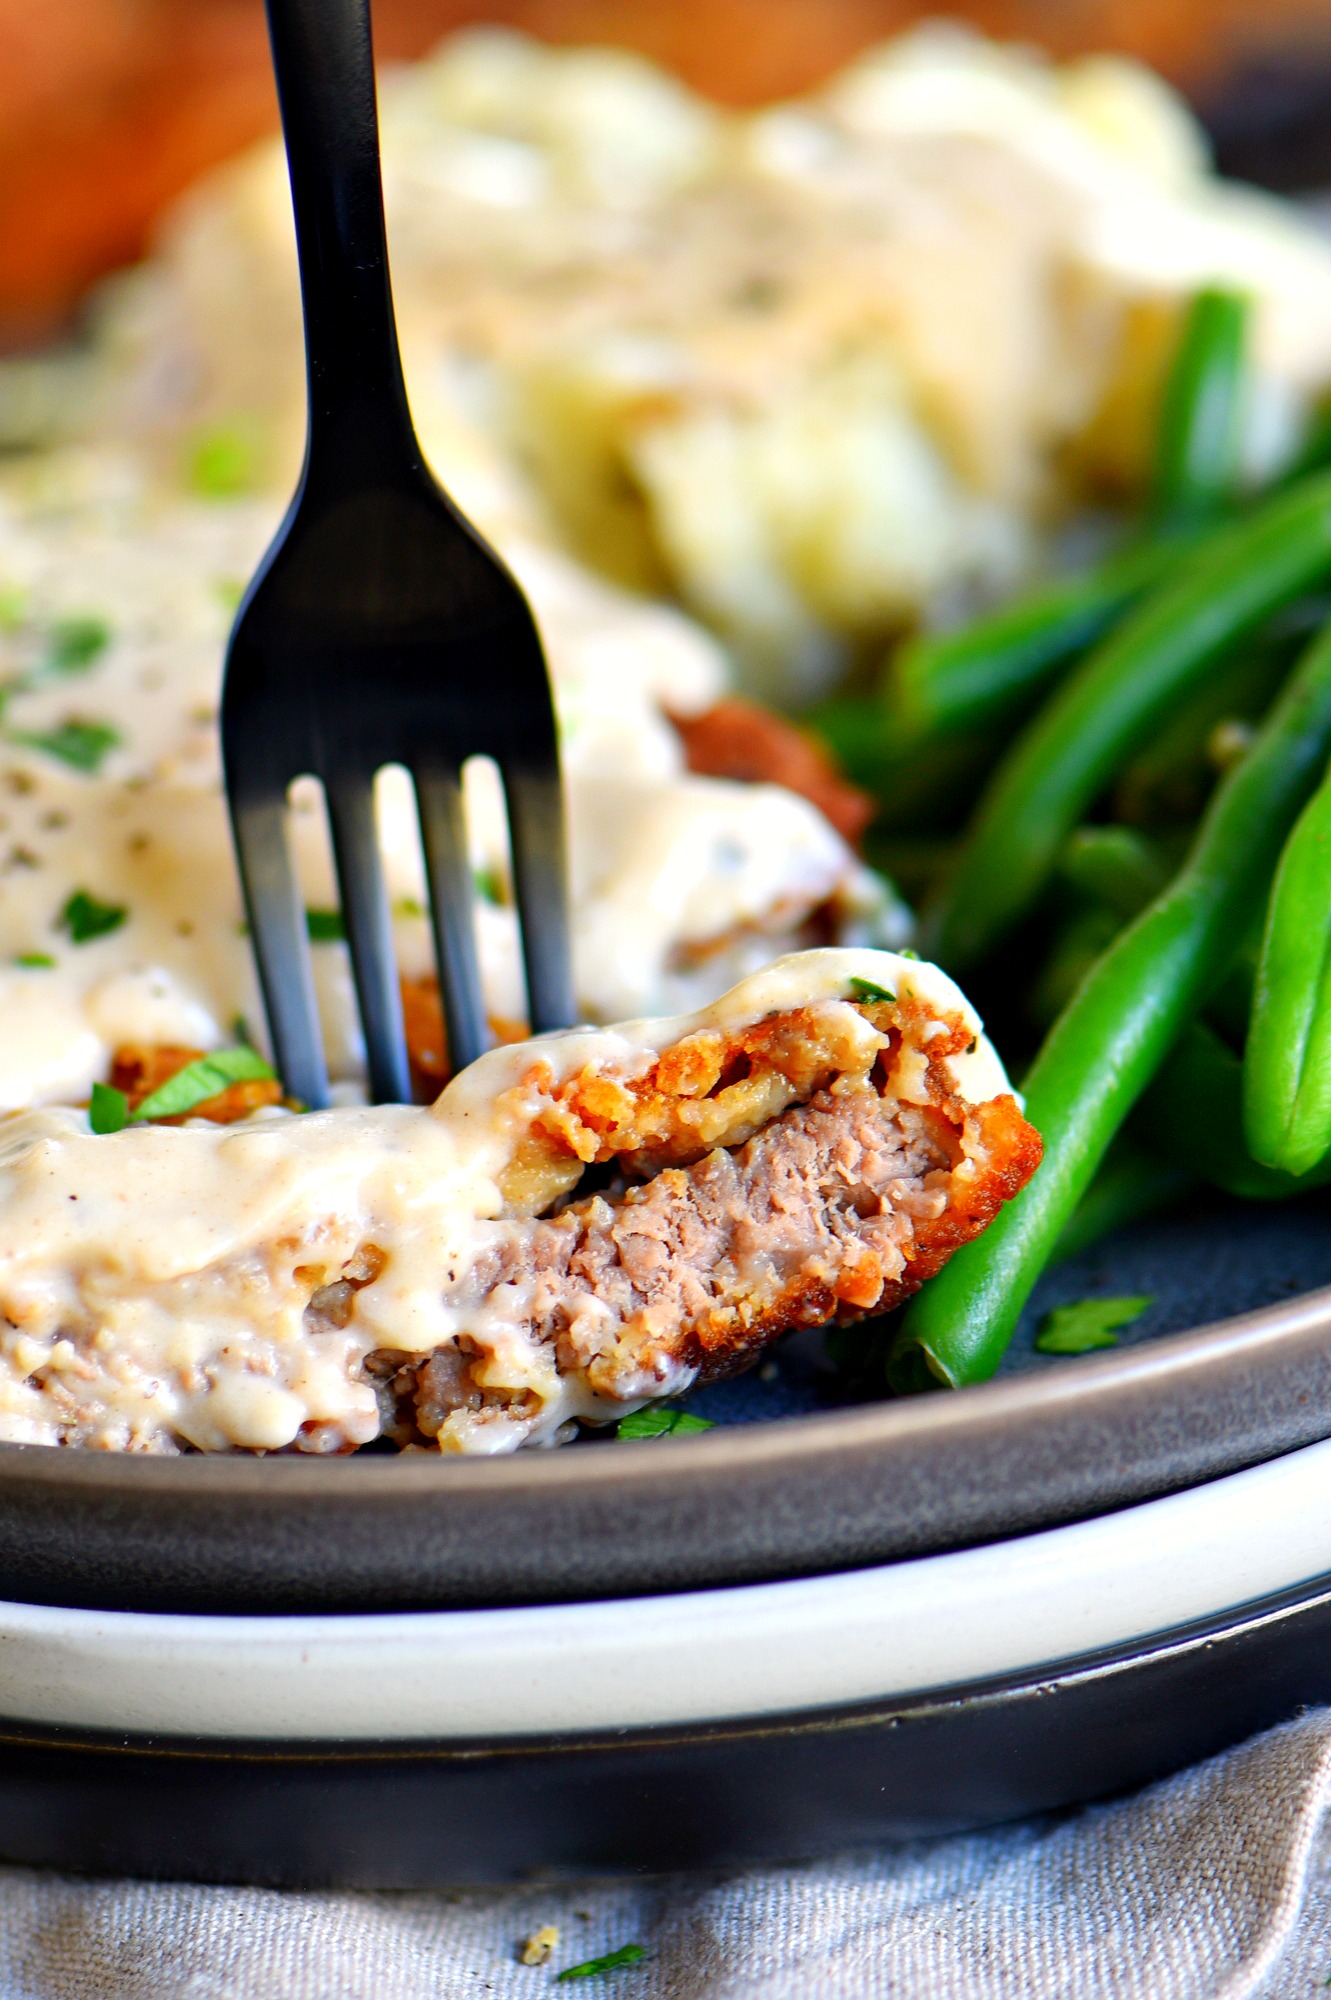 The Ultimate Chicken Fried Steak Recipe with Gravy